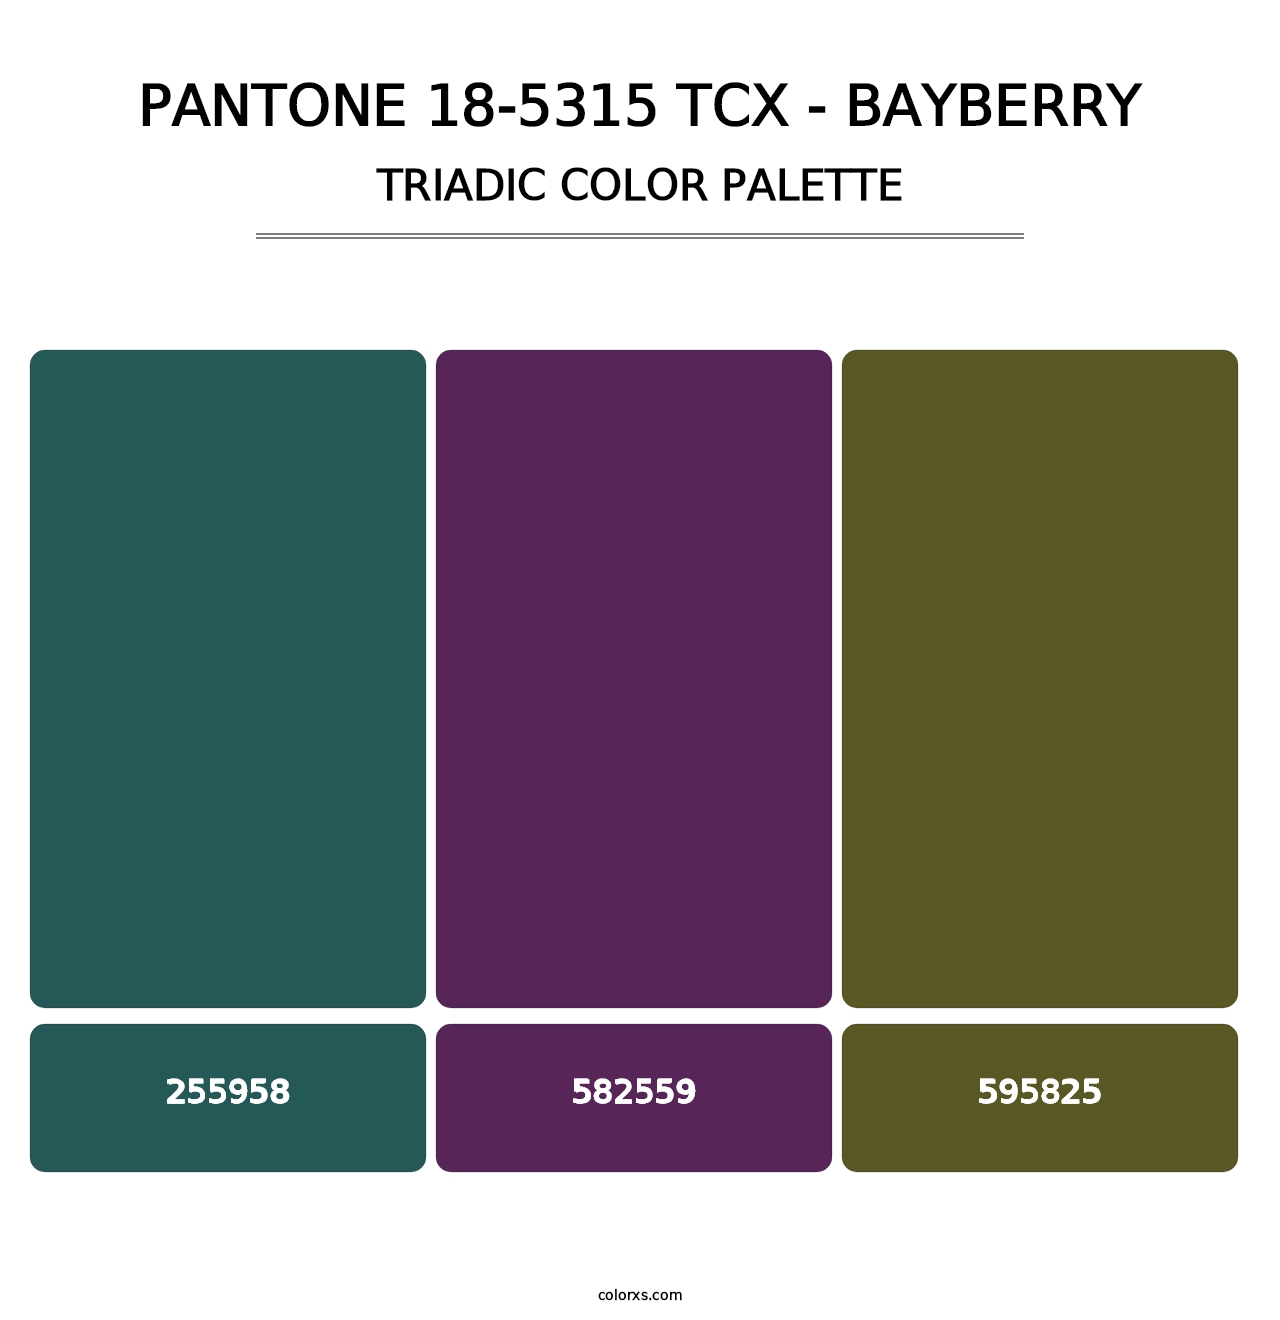 PANTONE 18-5315 TCX - Bayberry - Triadic Color Palette